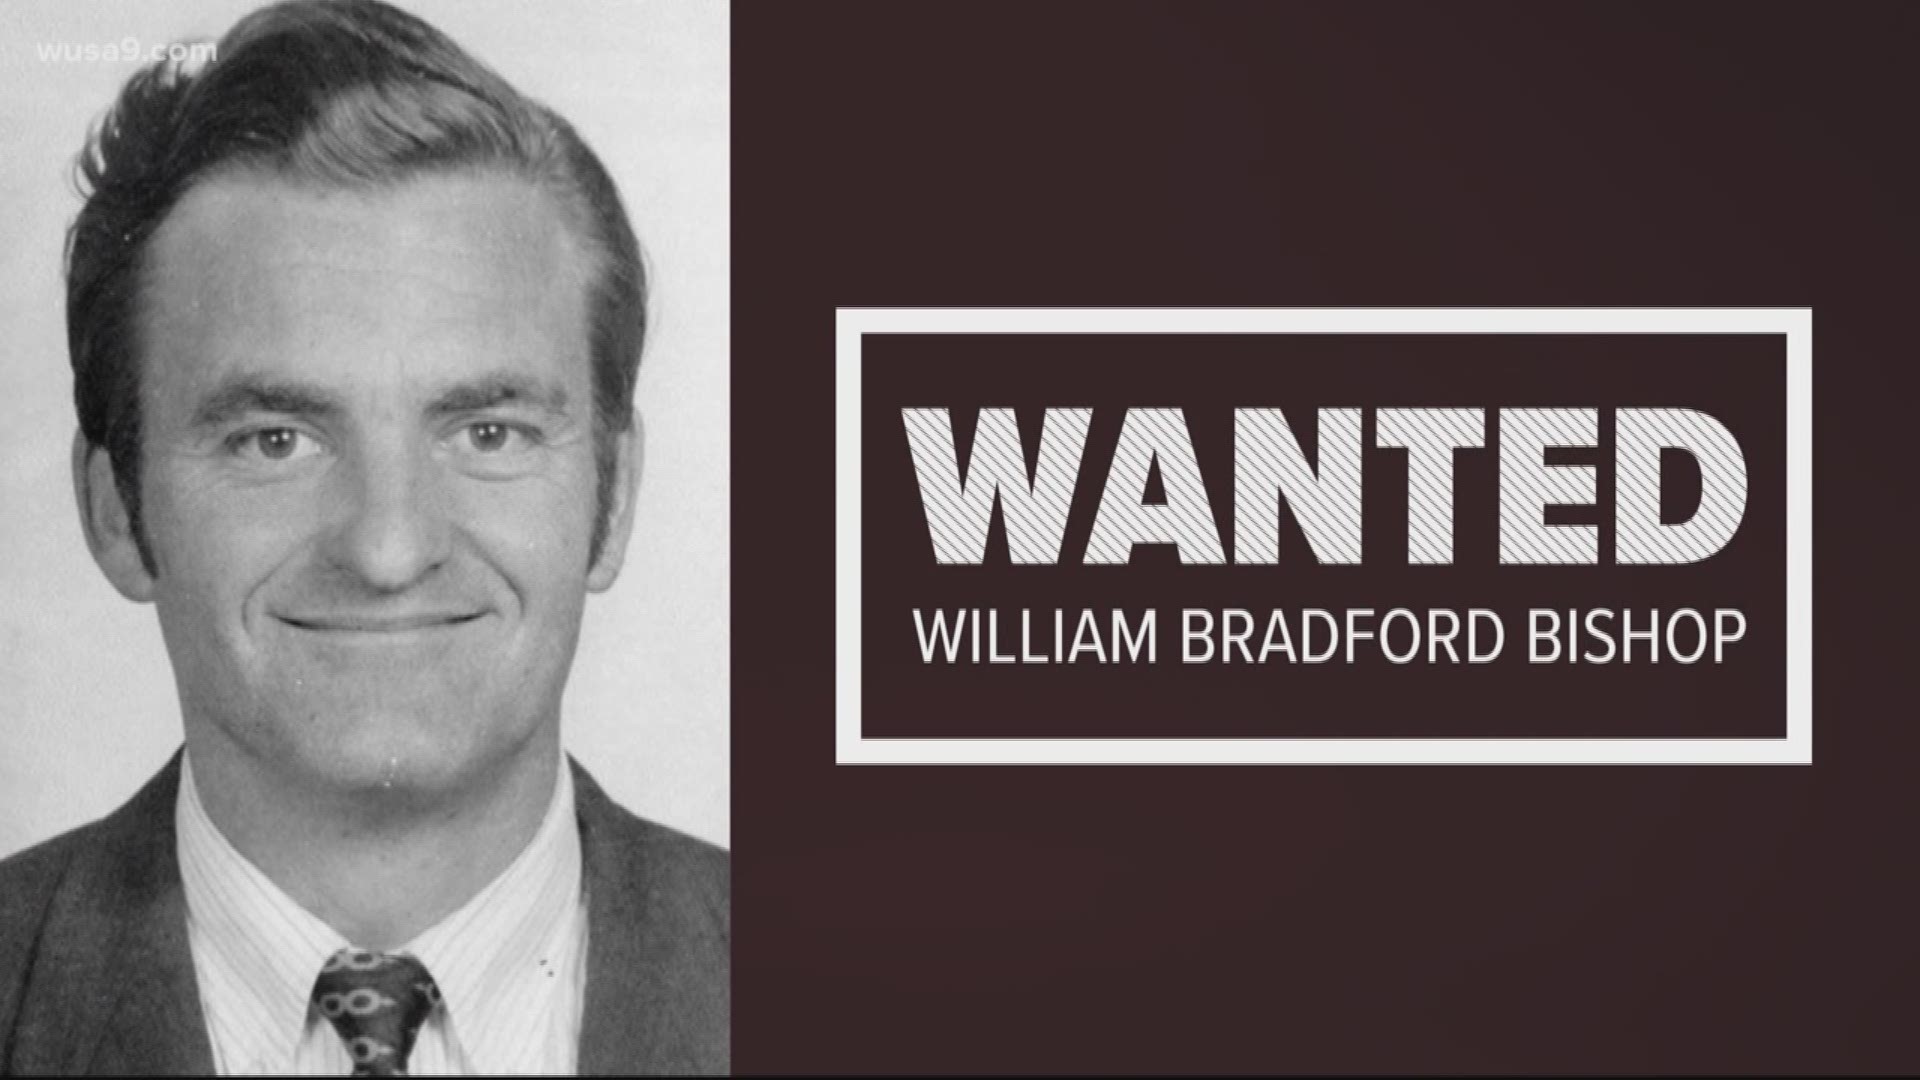 Forty-four years ago this month, State Department Foreign Service Officer William Bradford Bishop allegedly murdered his whole family in Bethesda – and disappeared.